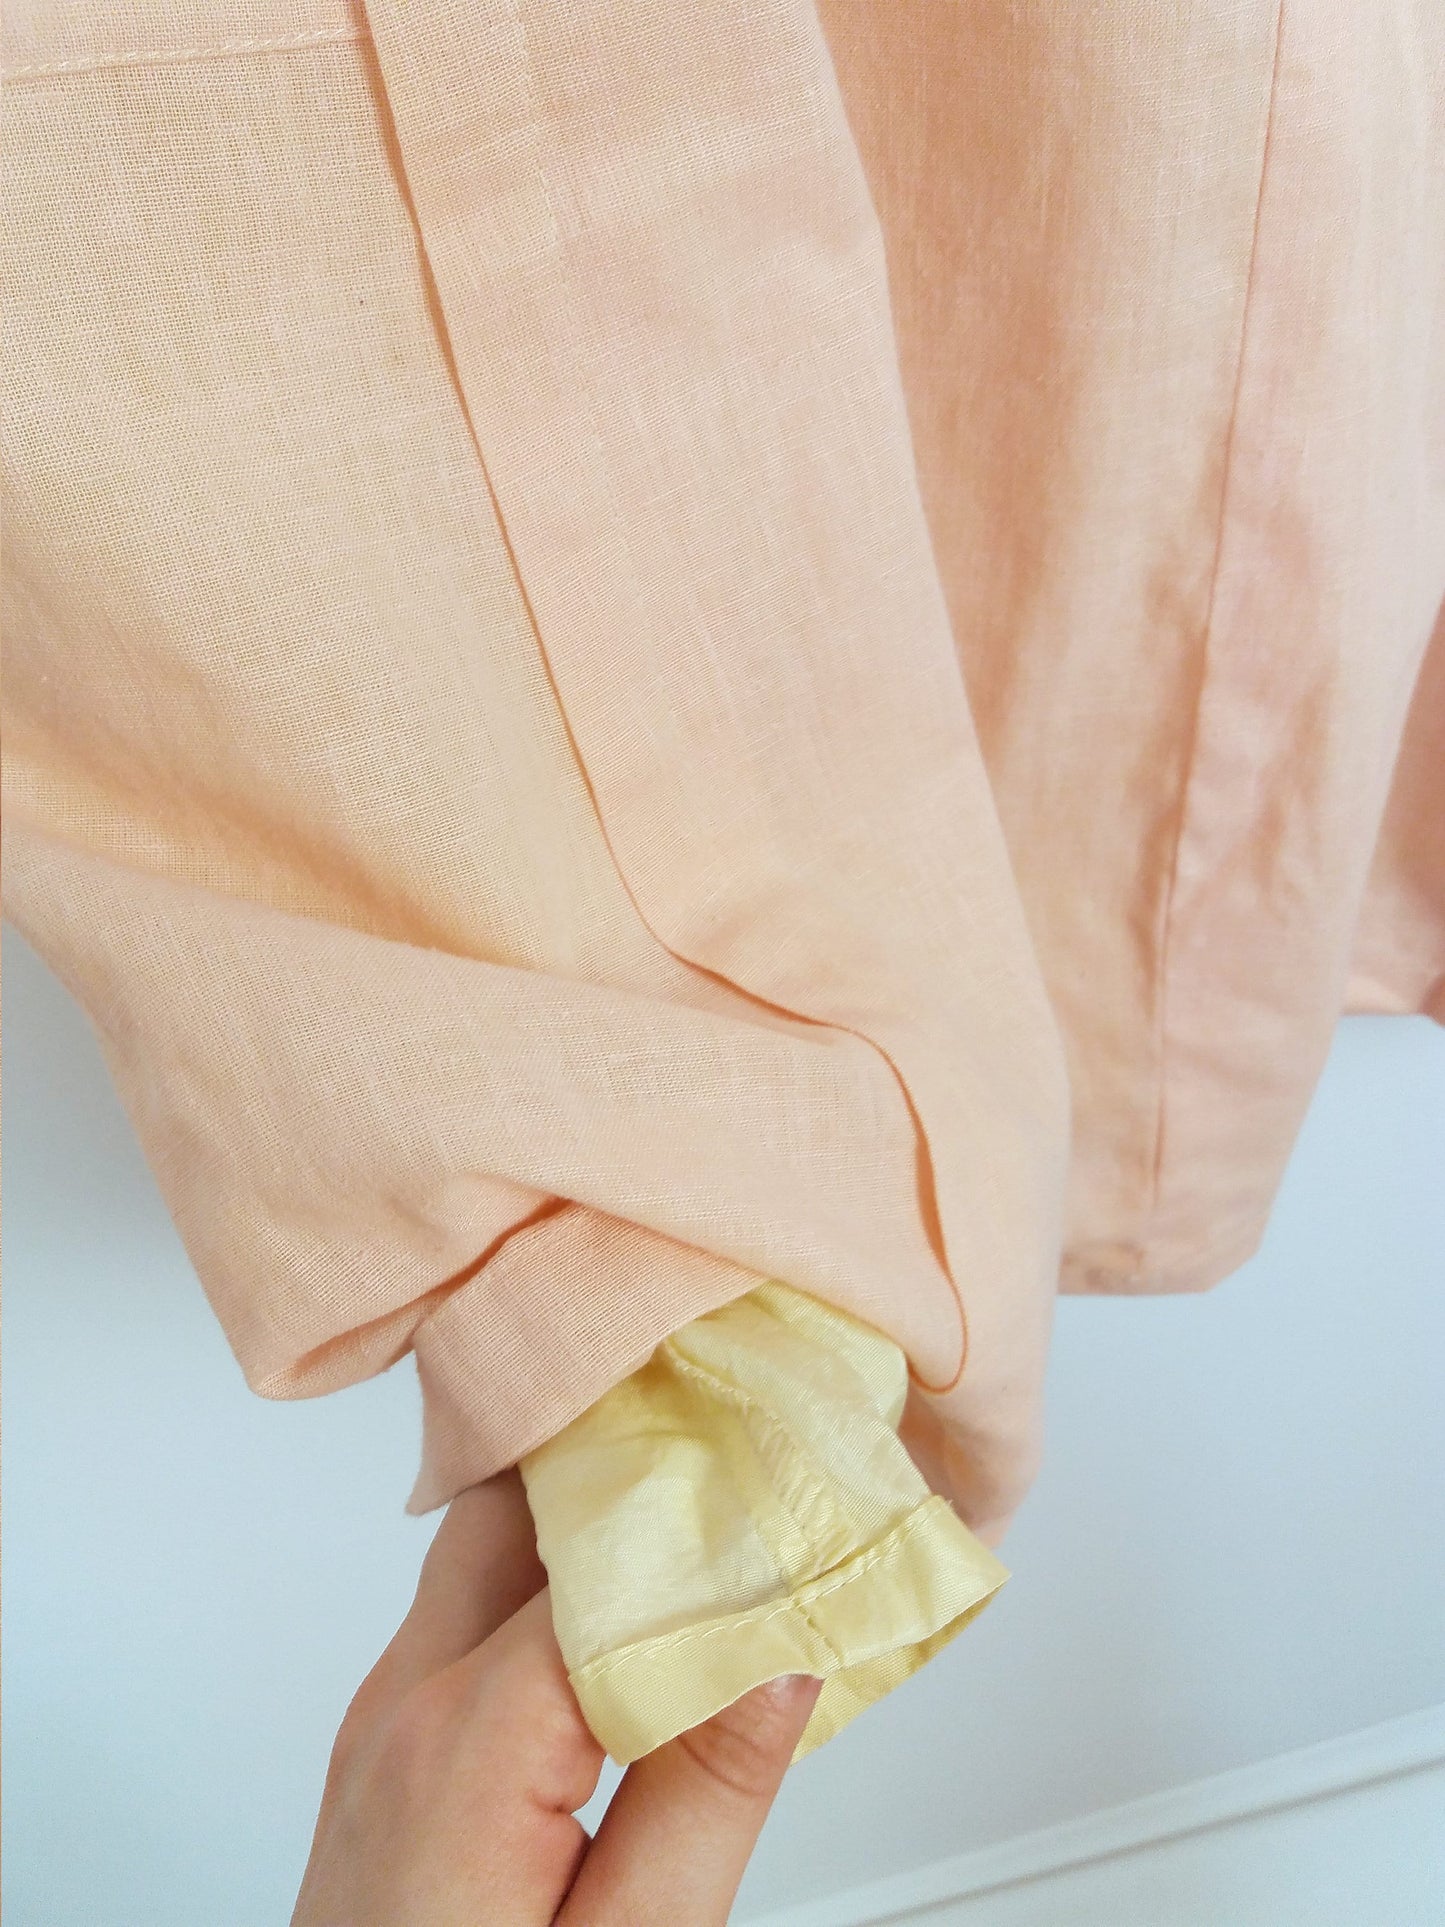 Two-piece Linen Set Top and Skirt Peach Pink - Size M - F 40/ GB 12 / US 10